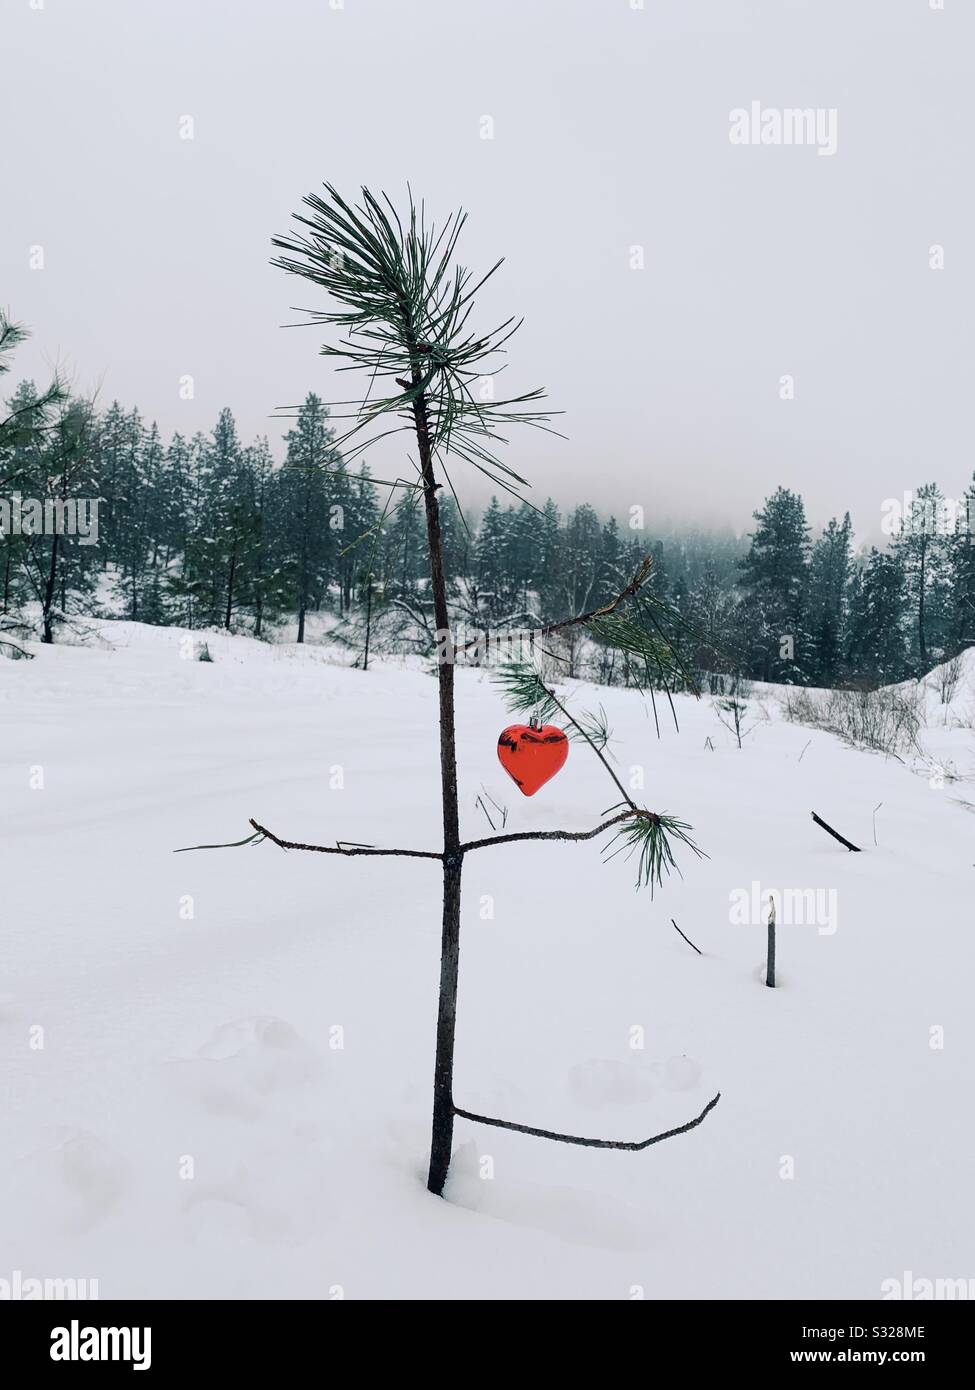 Lone small odd pine tree with a heart shaped red Christmas ornament in a snowy meadow with evergreen forest in the background. Stock Photo